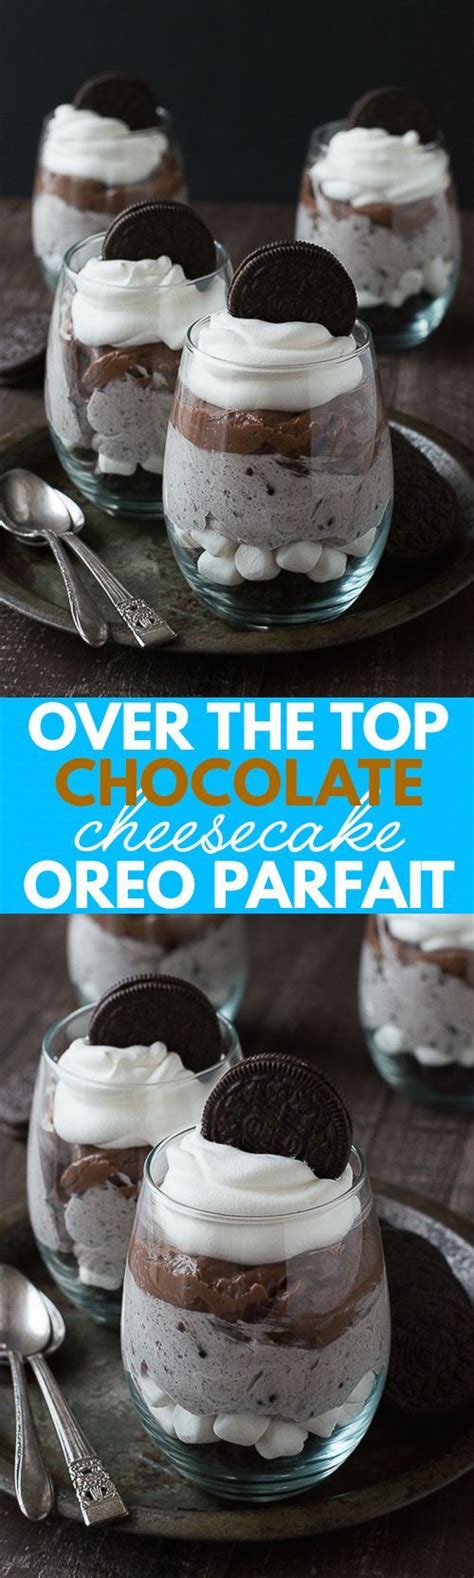 Drizzle for the top of 2 oz. Over the Top Chocolate Cheesecake Oreo Parfaits | Recipe ...